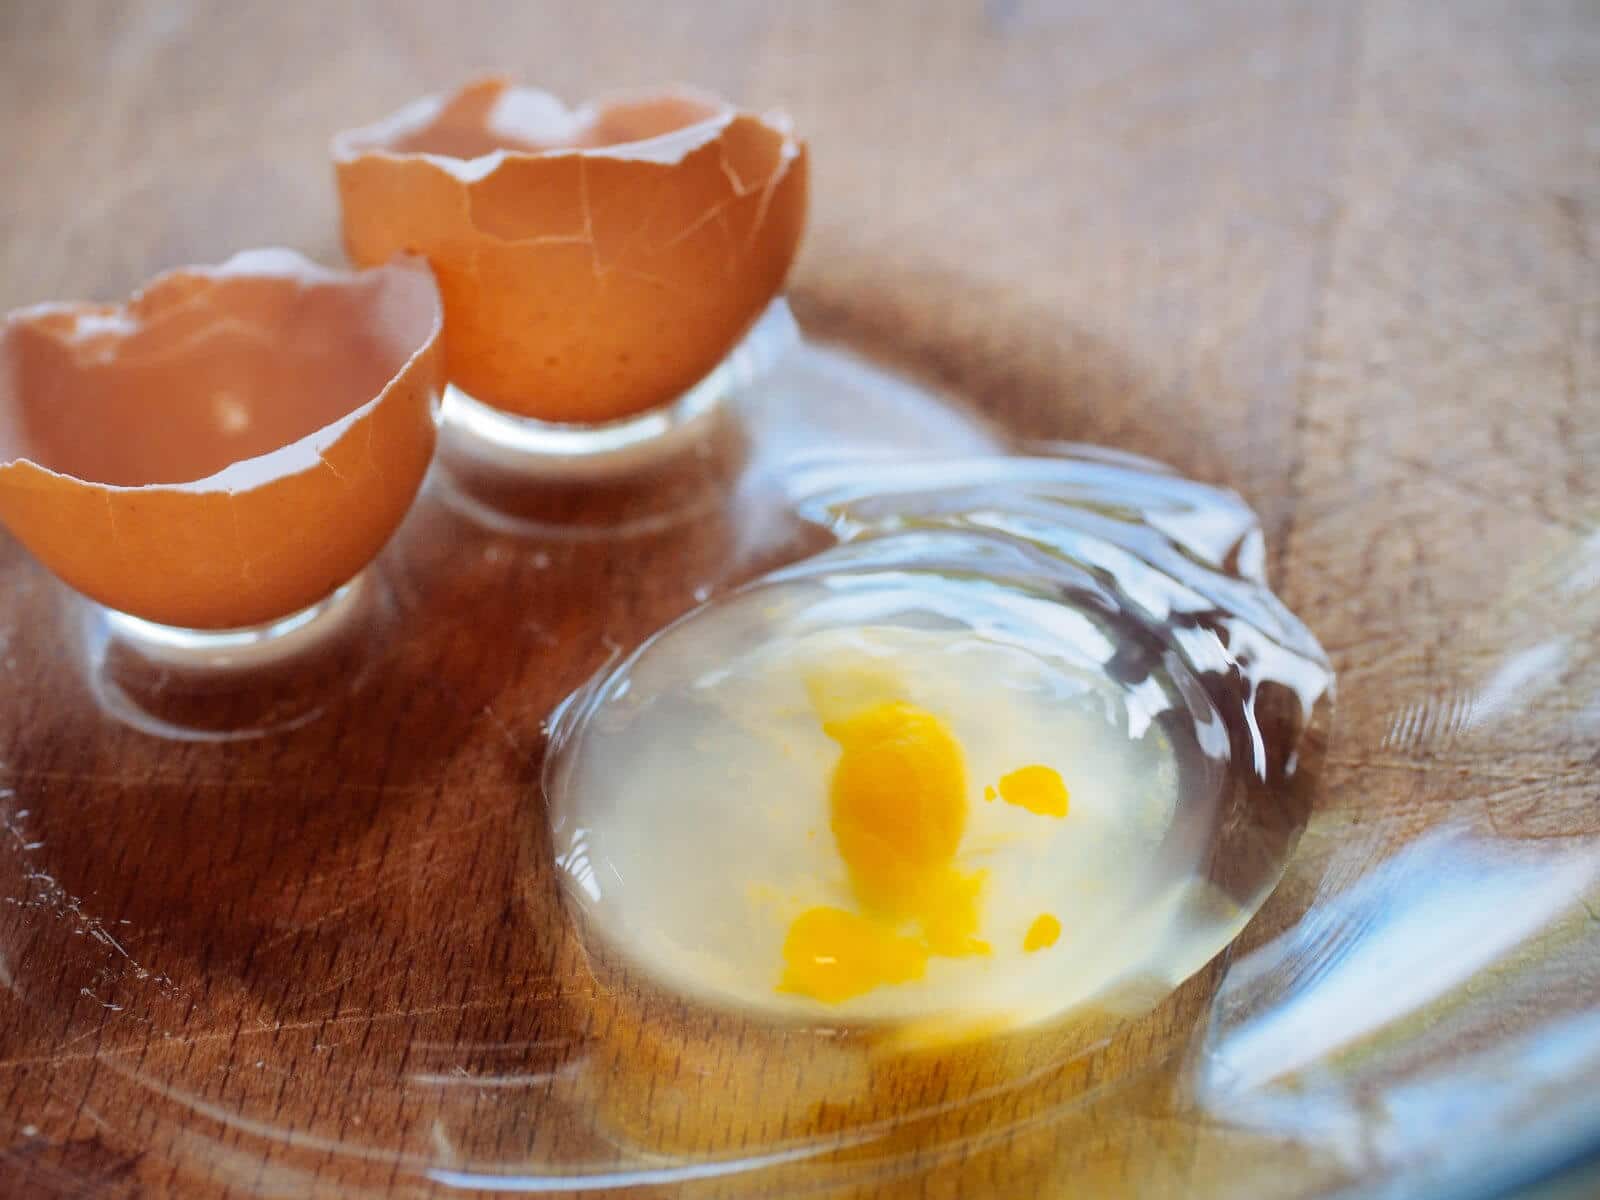 Some fart eggs are yolkless, but others have tiny, loose yolks